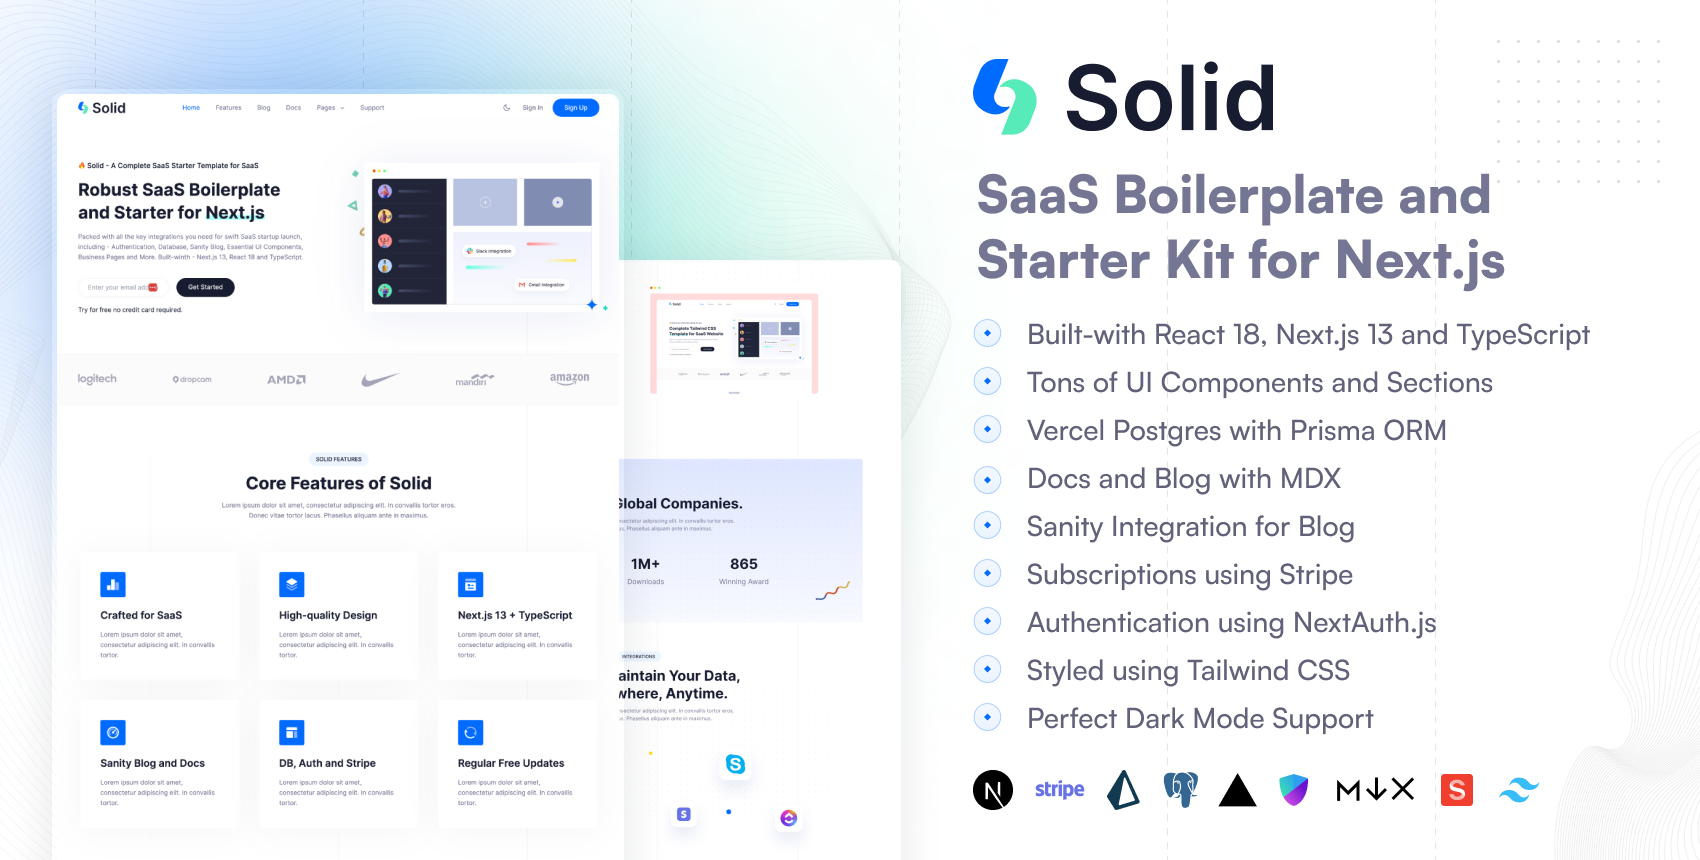 Solid - Next.js SaaS Boilerplate and Starter Kit